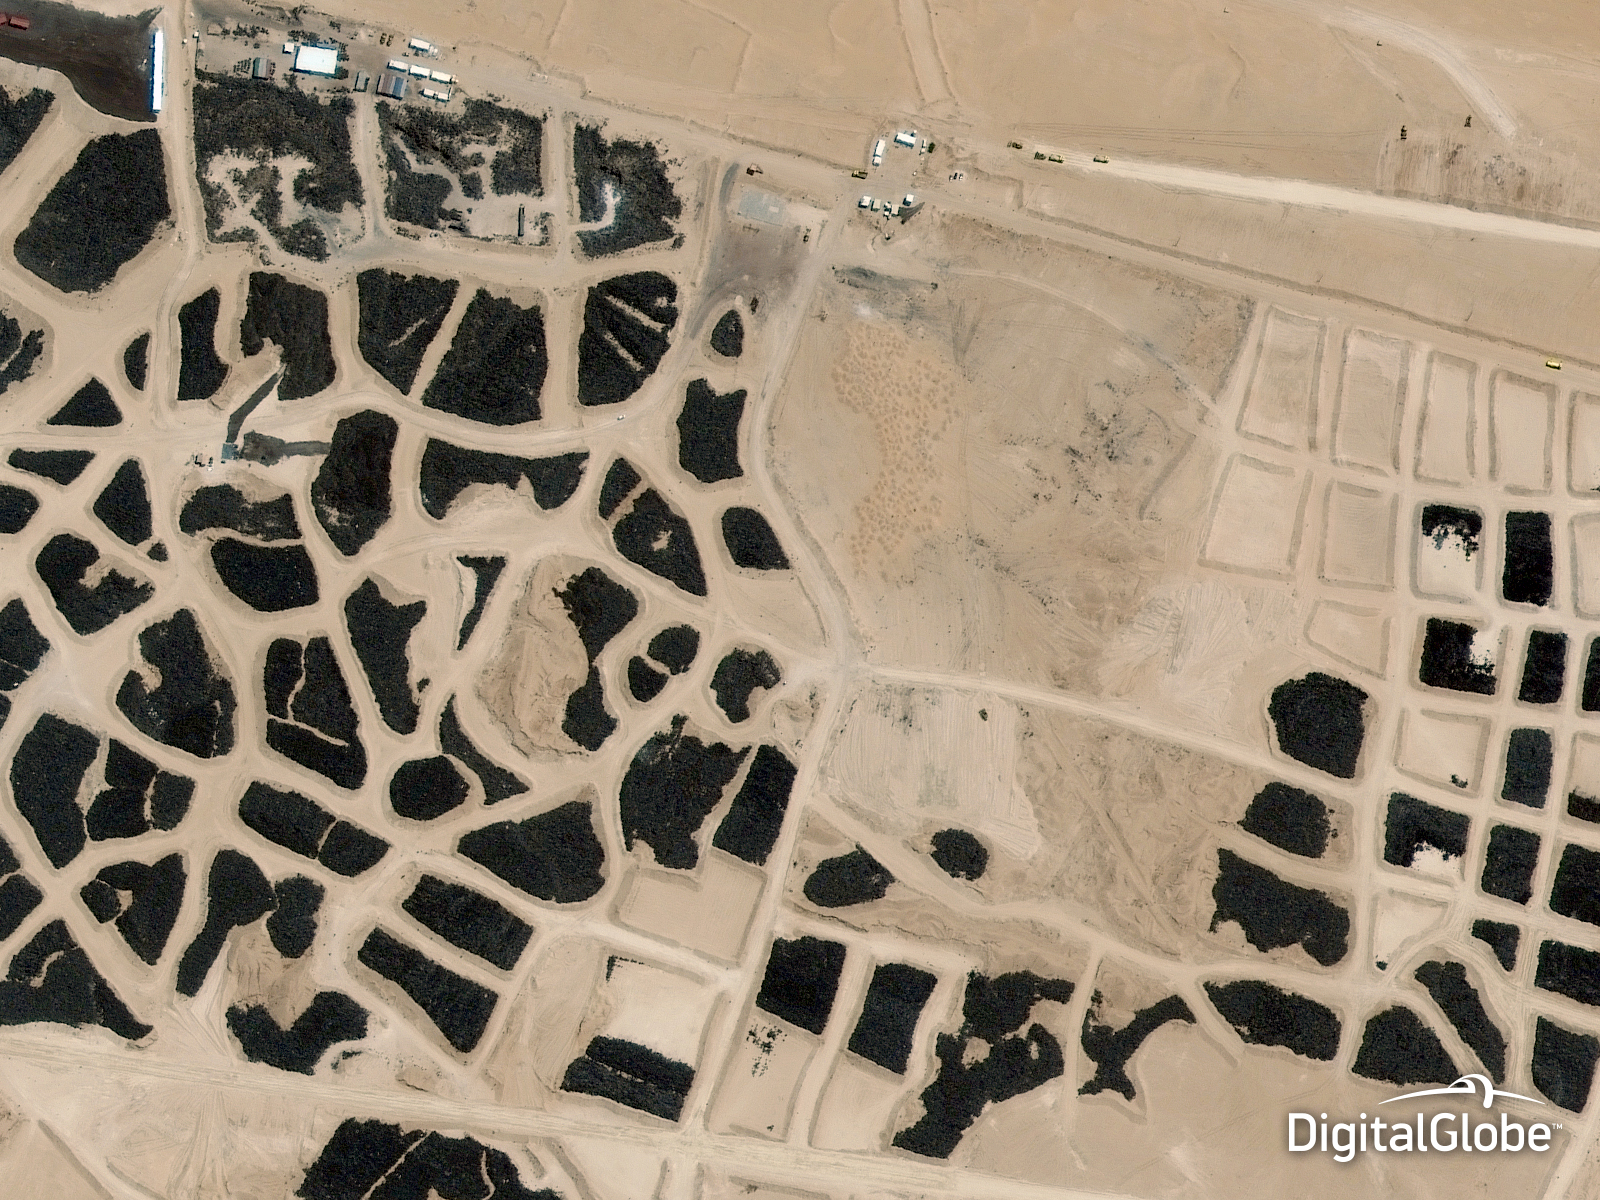 2014 As Told By Photos From The World’s Highest Resolution Satellites 